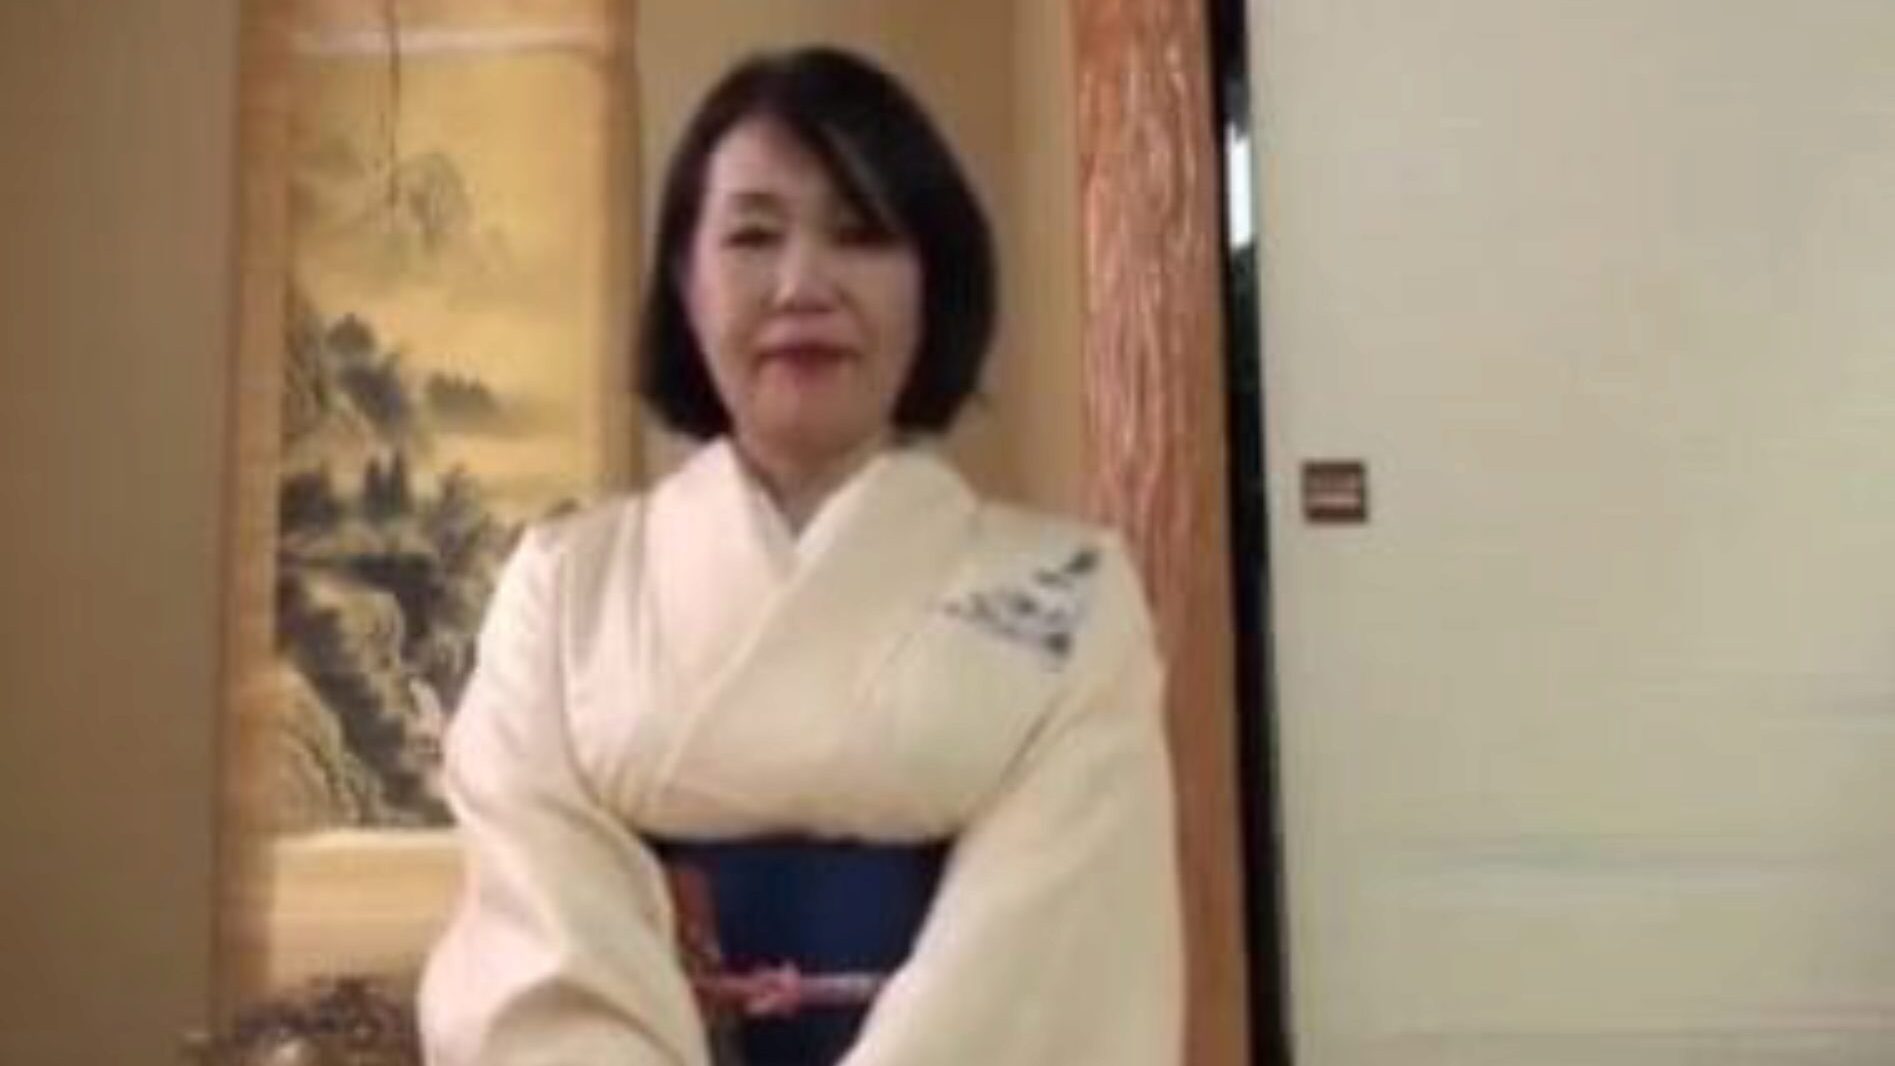 Japanese Grandmother 1, Free Xxx Japanese Tube Porn Movie 01 See Japanese Grandmother 1 clip sequence on xHamster, the hottest romp tube web resource with tons of free Xxx Japanese Tube & Spankwire Mobile porno vids